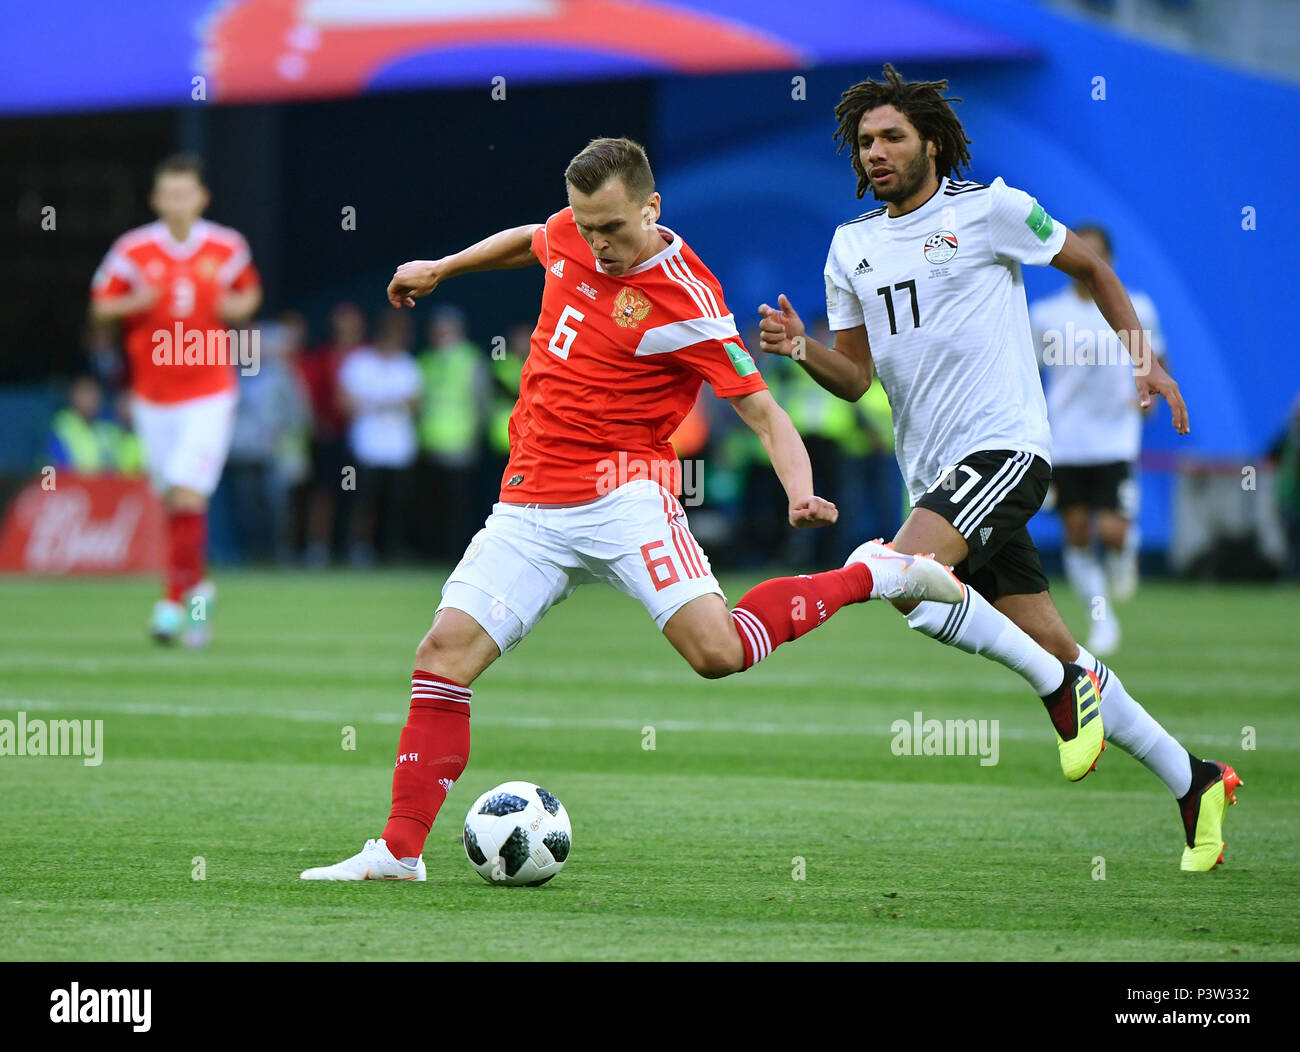 Saint Petersburg, Russia. 19th June, 2018. Denis Cheryshev (L) of Russia passes the ball during a Group A match between Russia and Egypt at the 2018 FIFA World Cup in Saint Petersburg, Russia, June 19, 2018. Credit: Li Ga/Xinhua/Alamy Live News Stock Photo